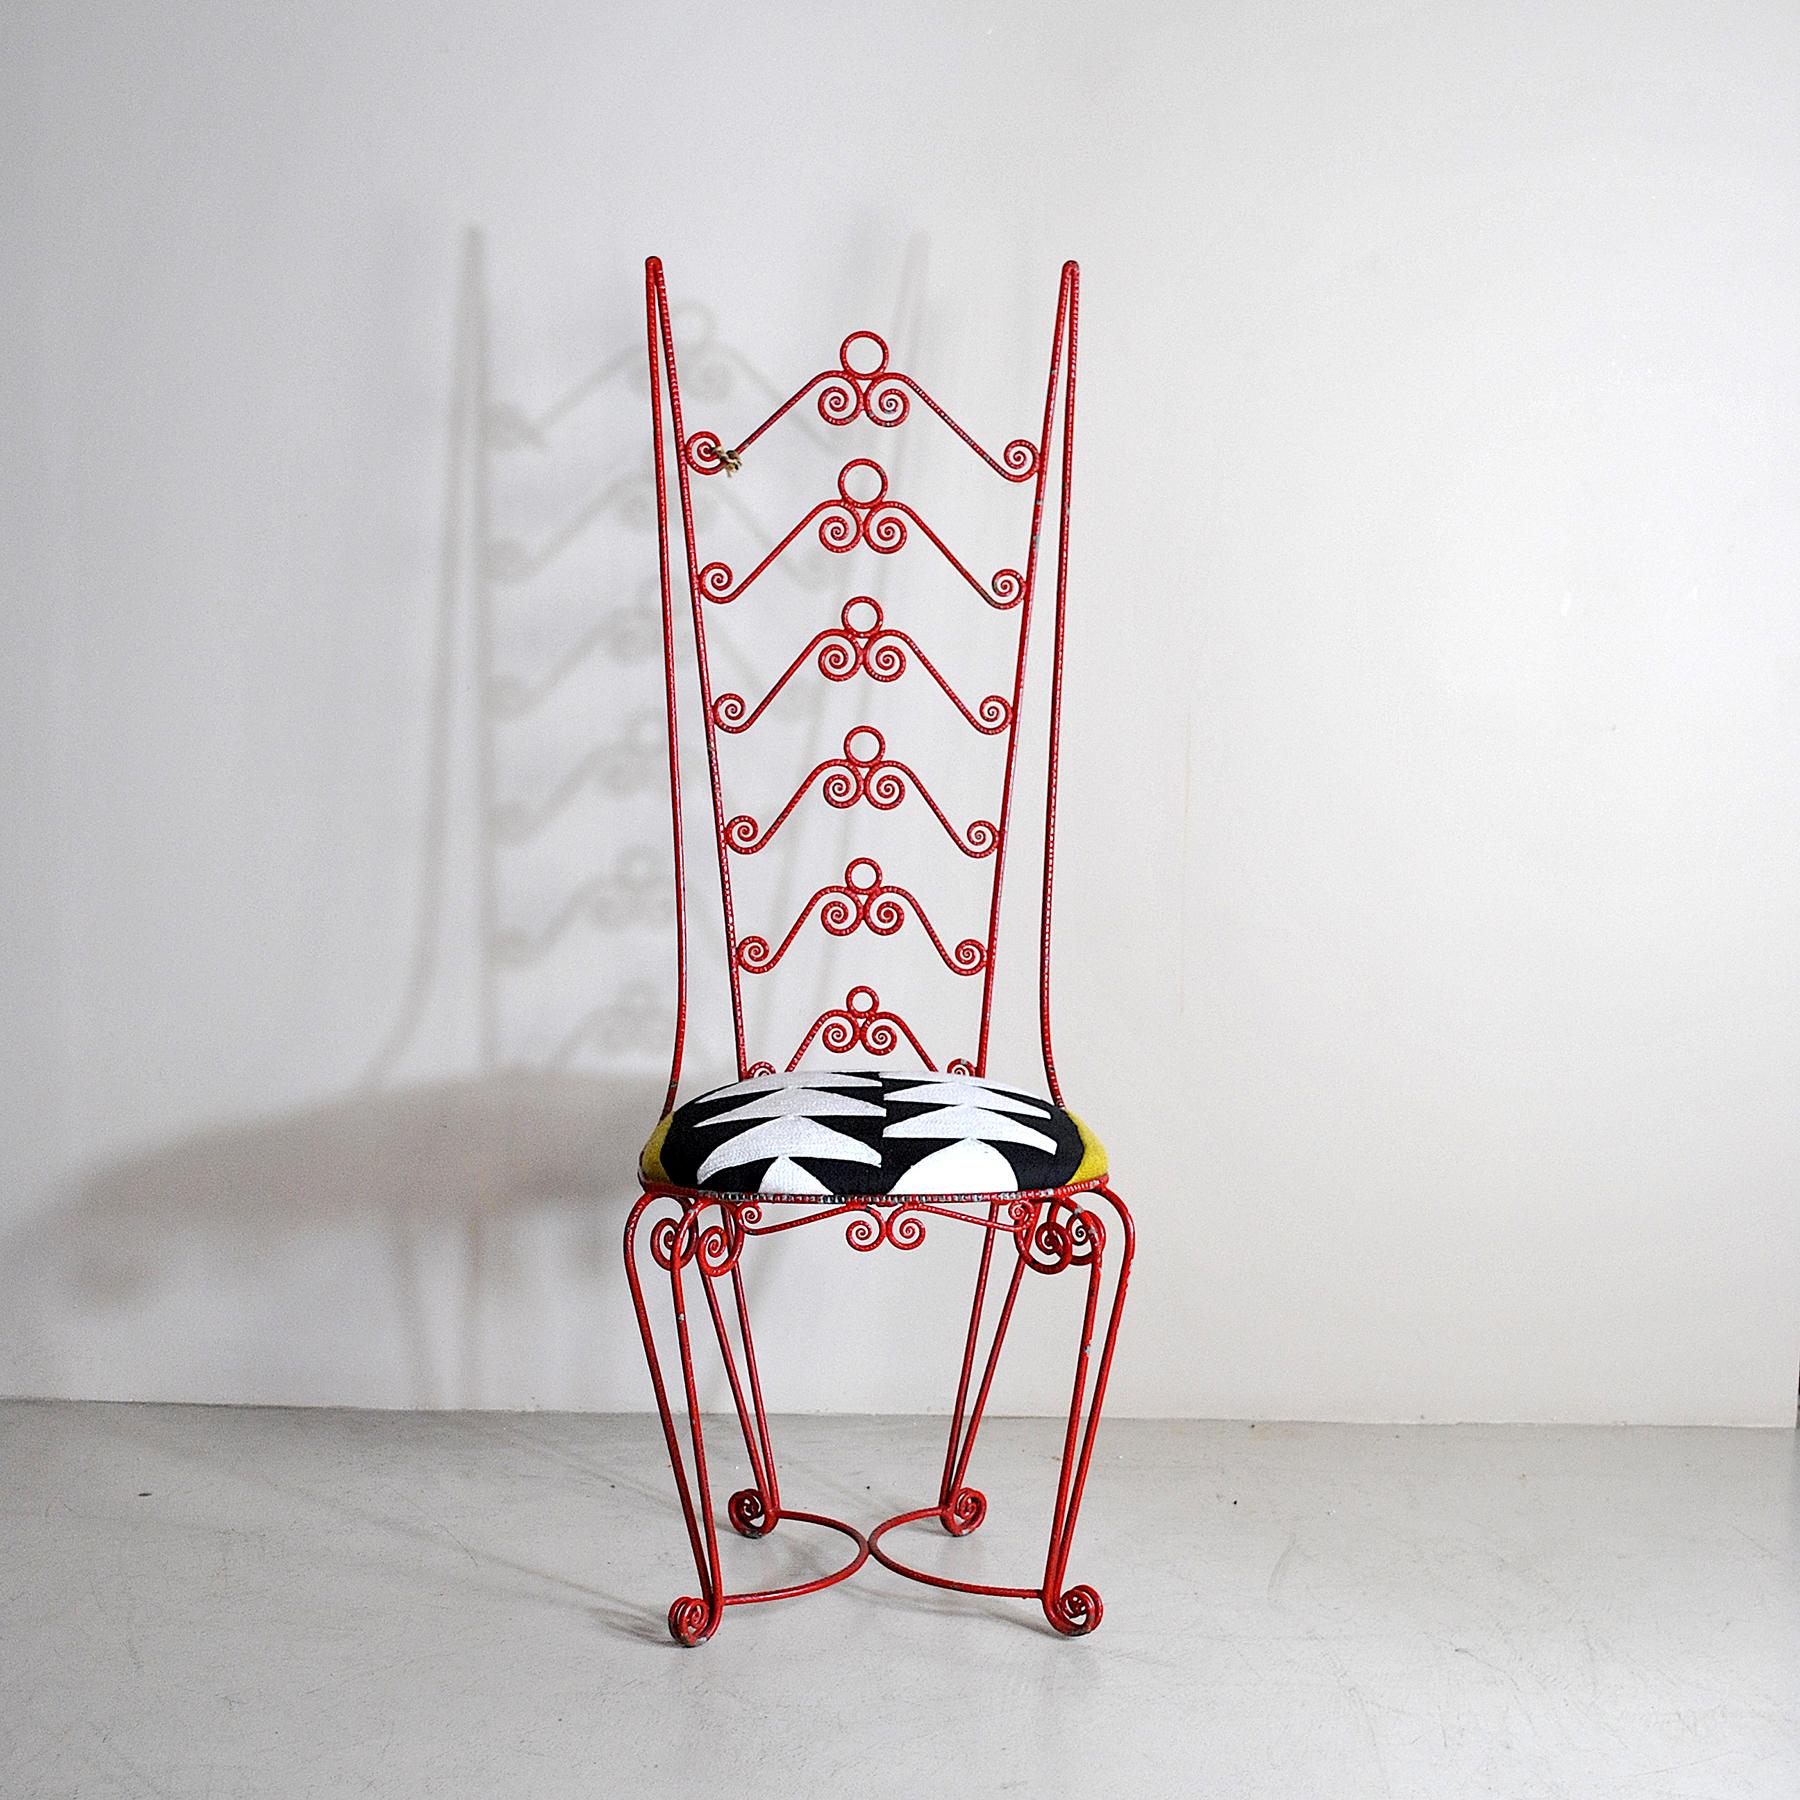 lacquered wrought iron chair from the Italian school of the D’Andrea craftsman from Lecce from the late 1950s.